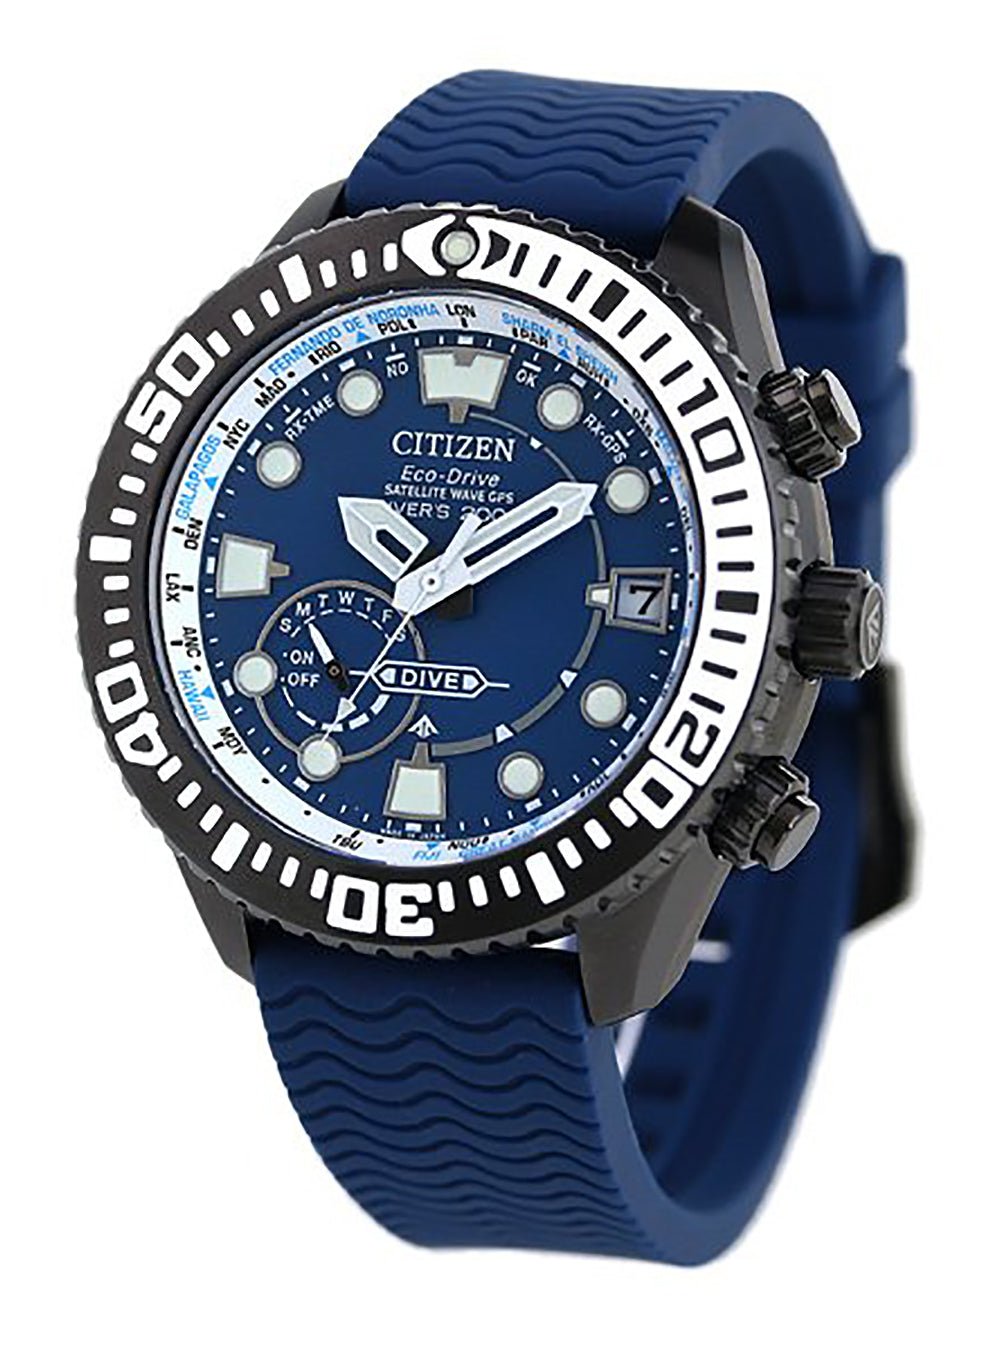 Citizen Promaster GPS Dive Watch CC5006-06L | Made in Japan – japan-select